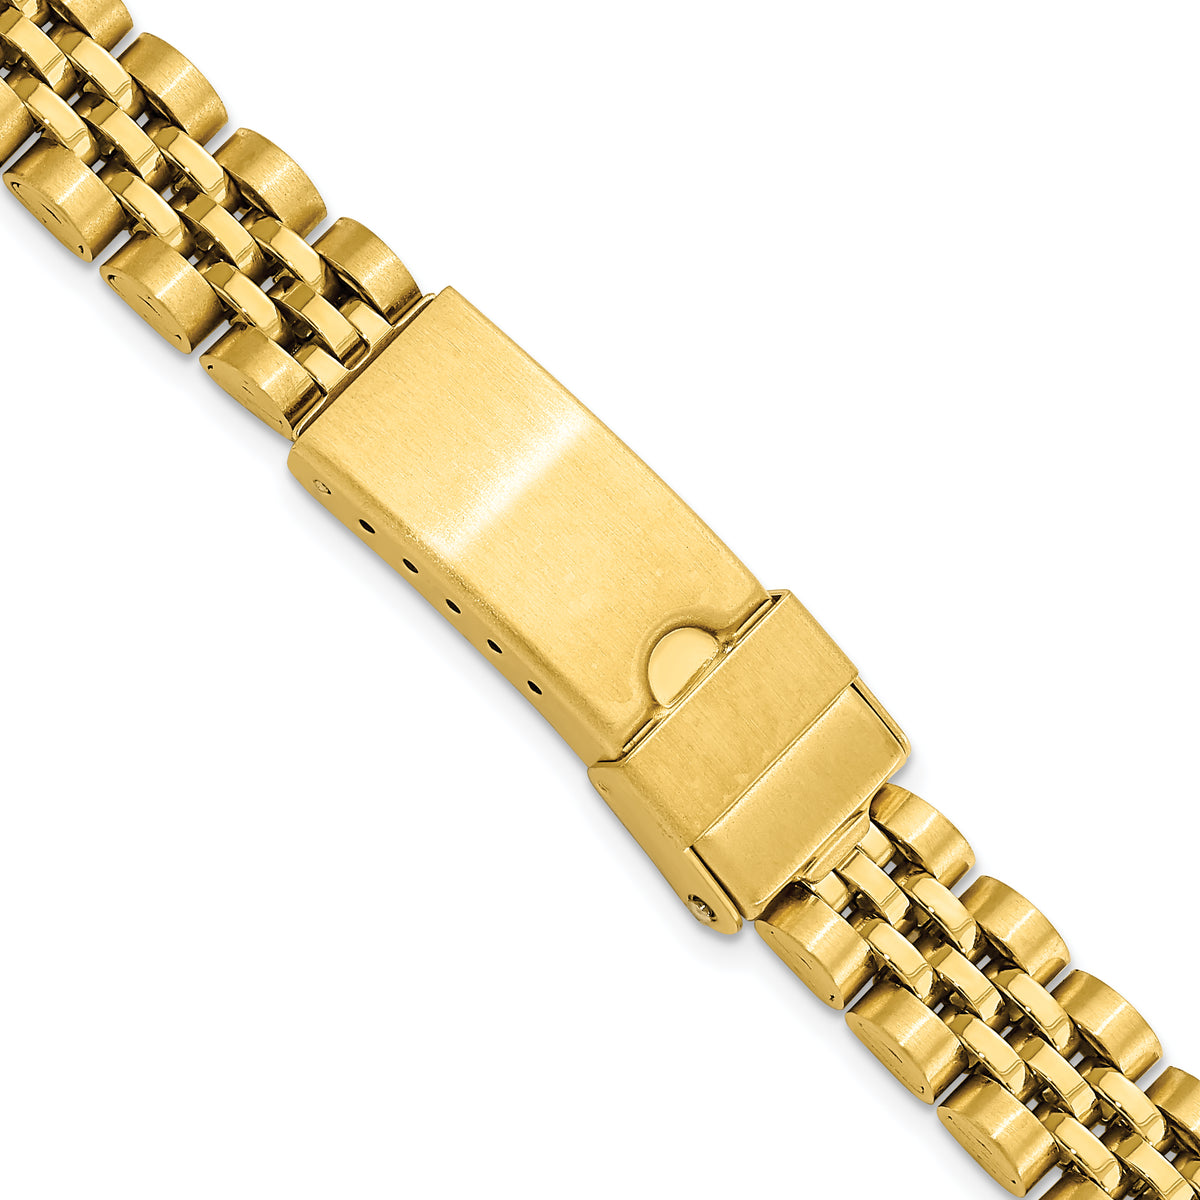 DeBeer 12-15mm Ladies Satin and Polished Gold-tone Stainless Steel Jubilee-Style with Deployment Buckle 7 inch Watch Band